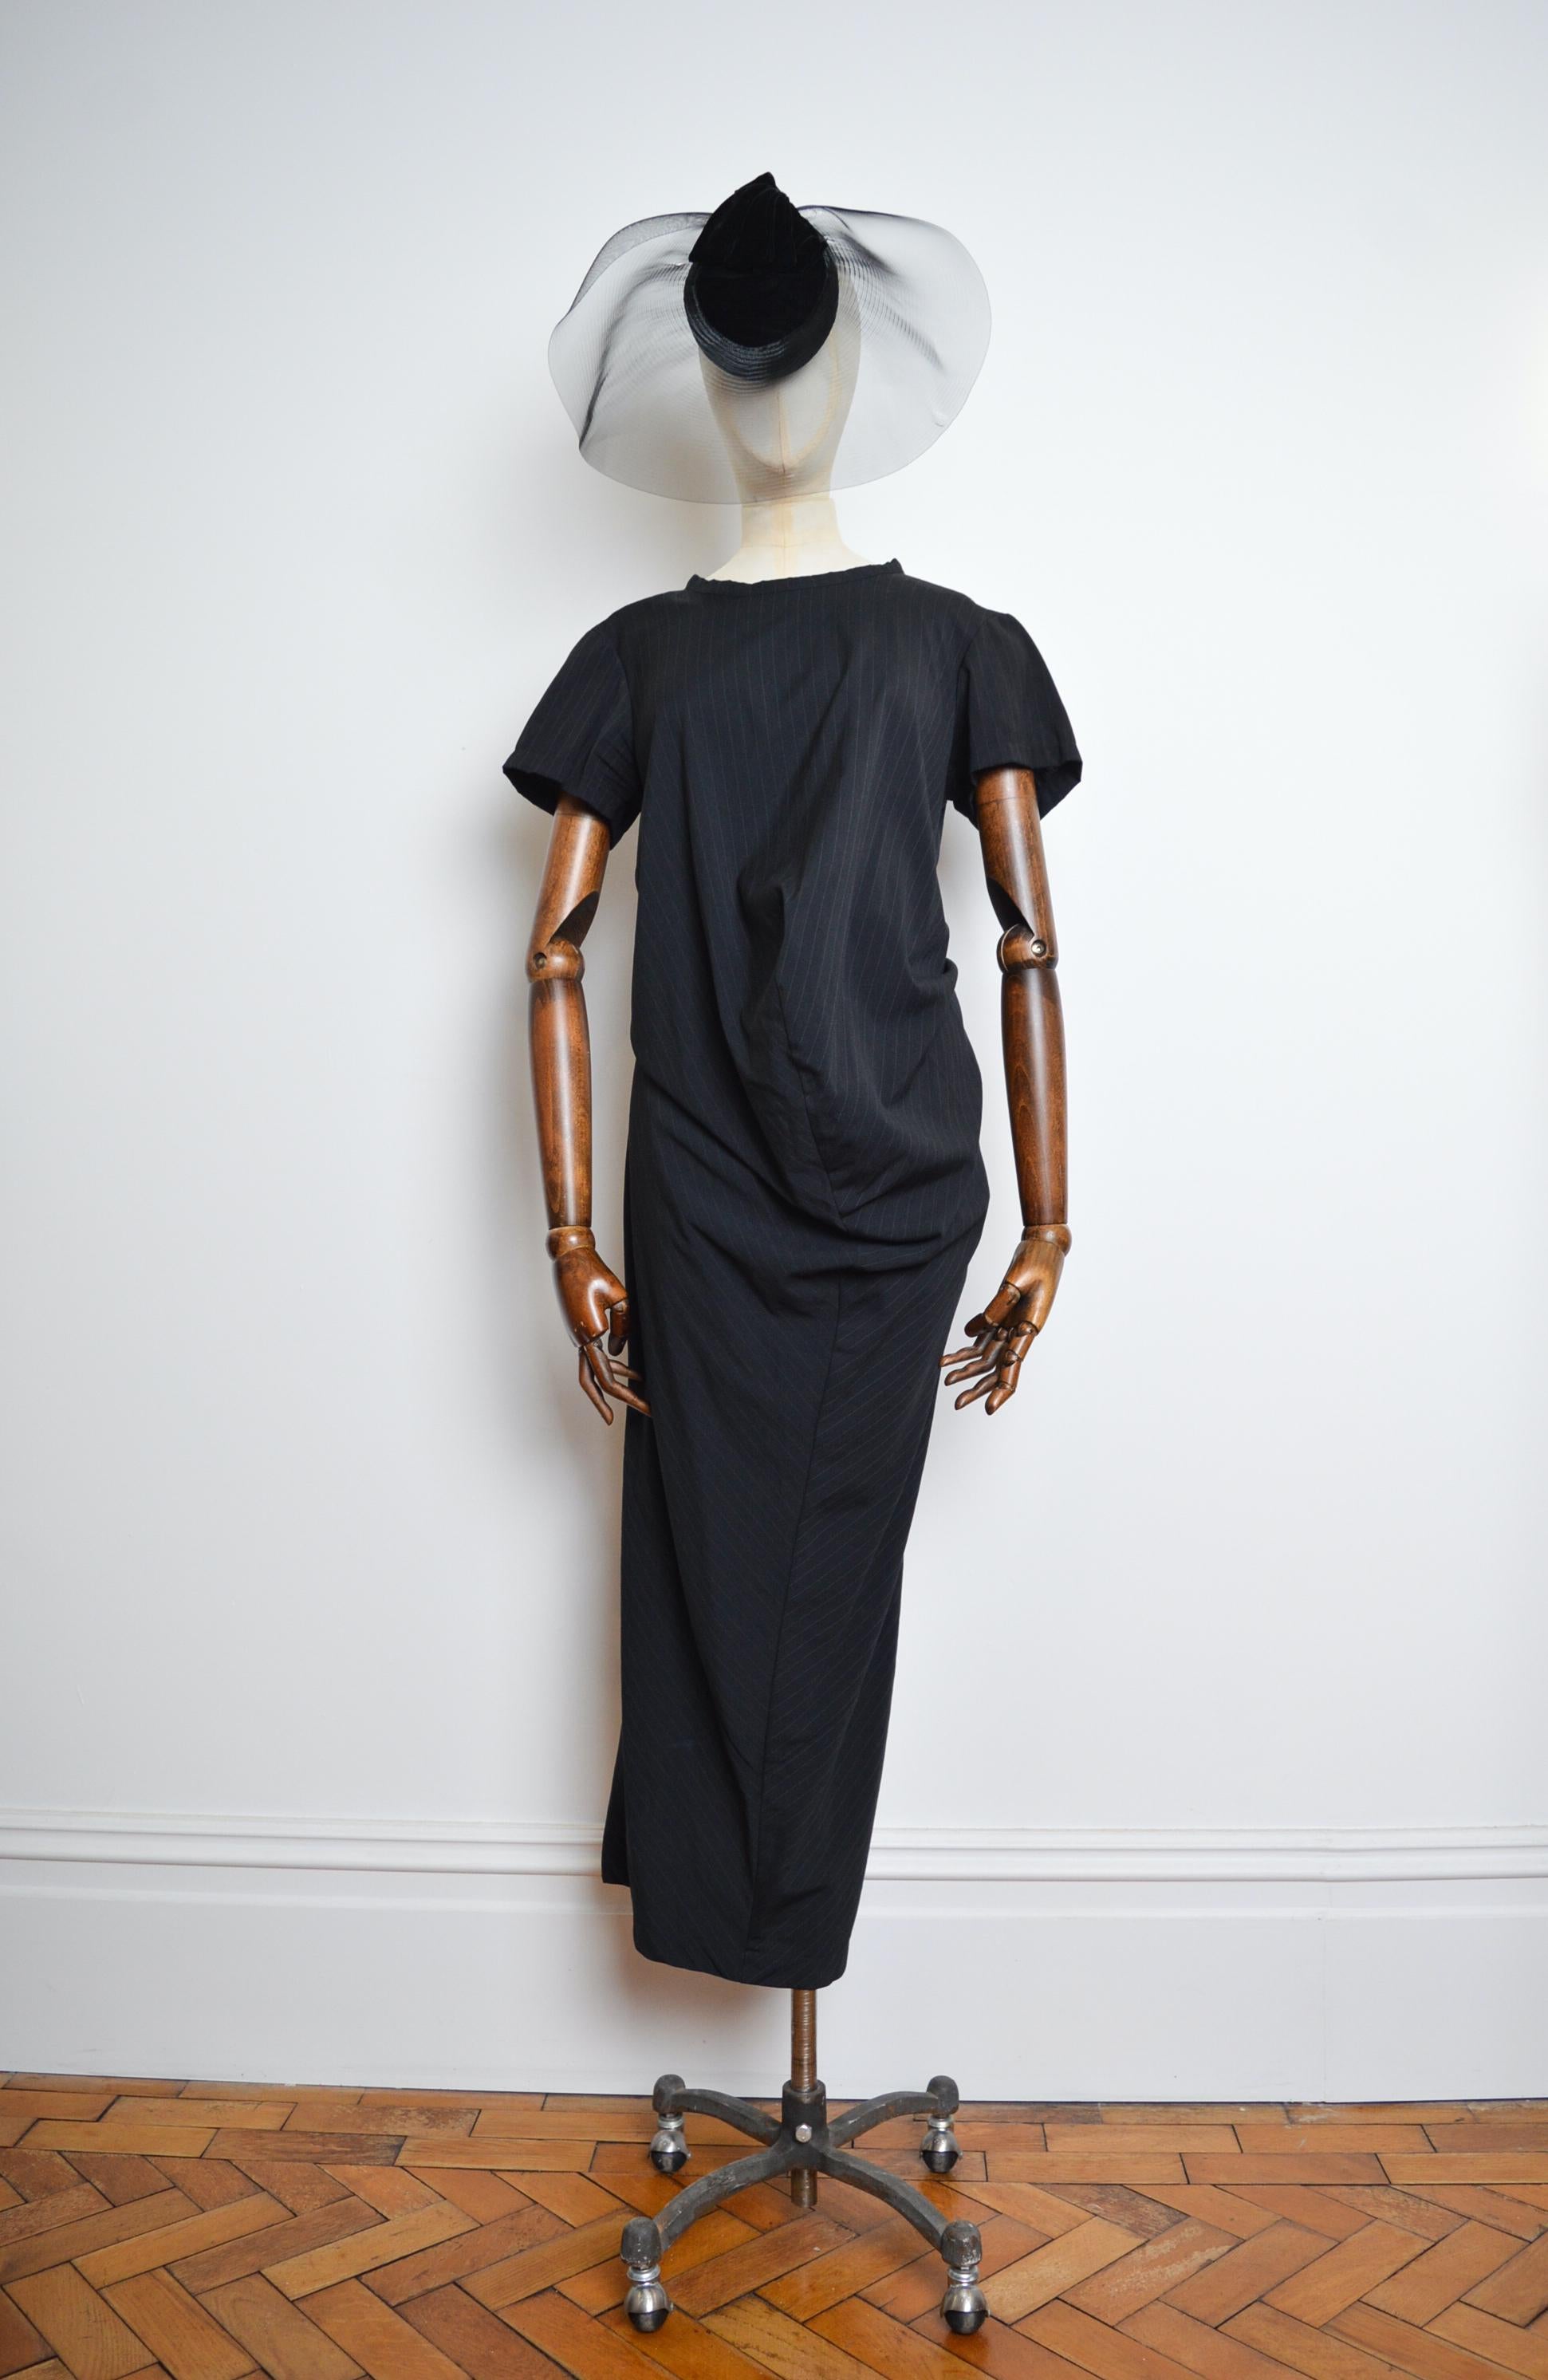 Superb ORIGINAL 1999, Avant Guard Pinstriped dress by COMME DES GARÇONS, elegantly constructed in a Charcoal Wool cloth.   

MADE IN JAPAN.   

The Garment can be moved and contorted to create multiple shapes and silhouettes.

Measurements provided